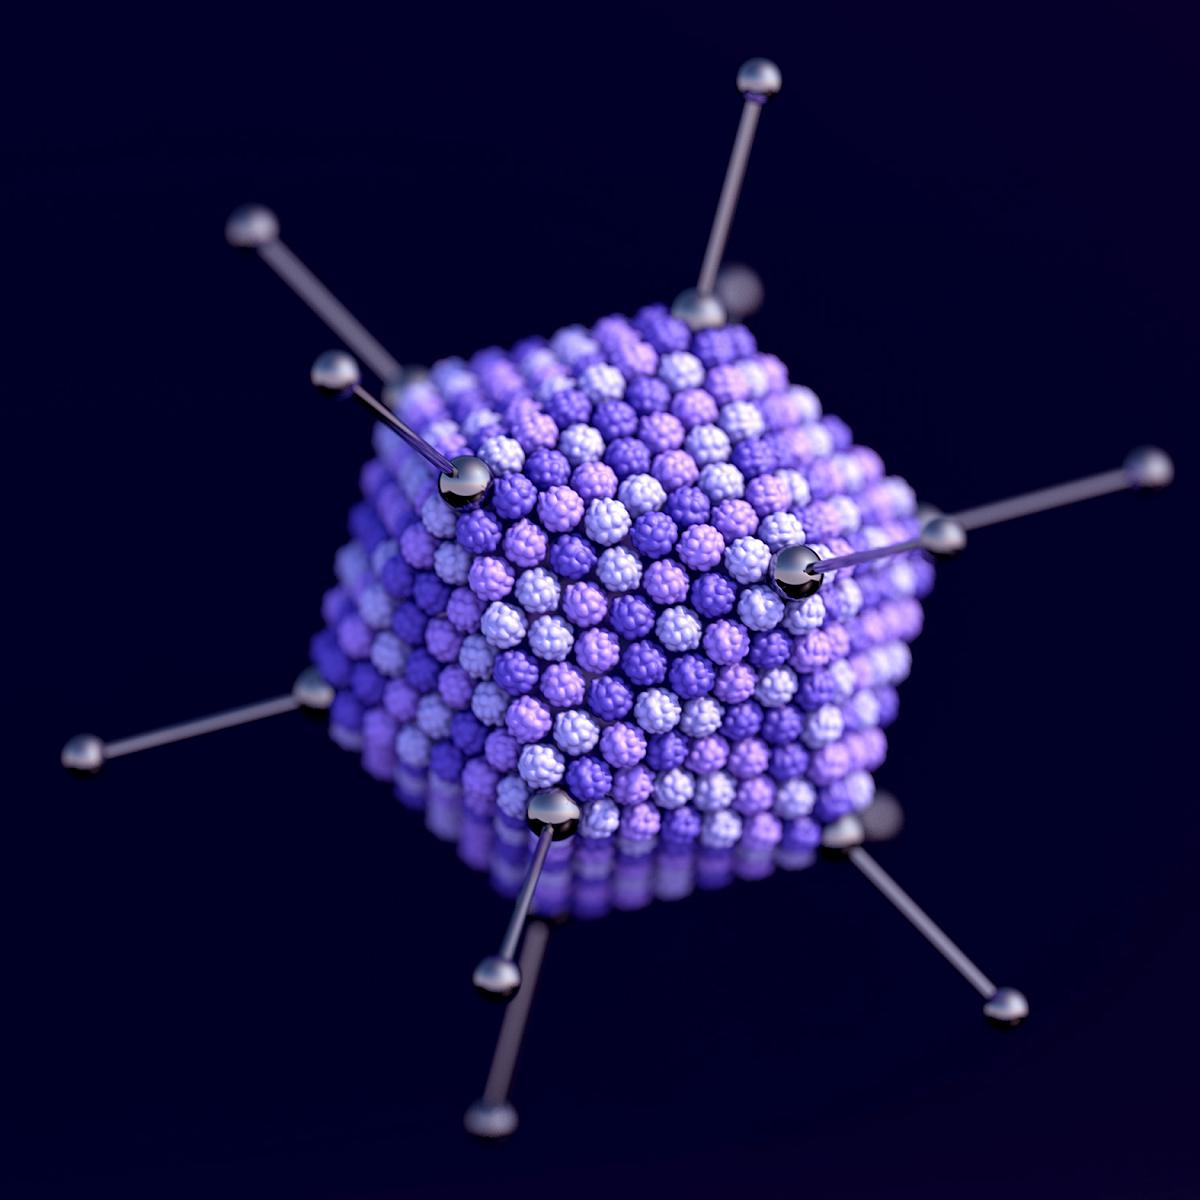 Artist’s depiction of an adenovirus, which can cause cold- and flu-like symptoms.